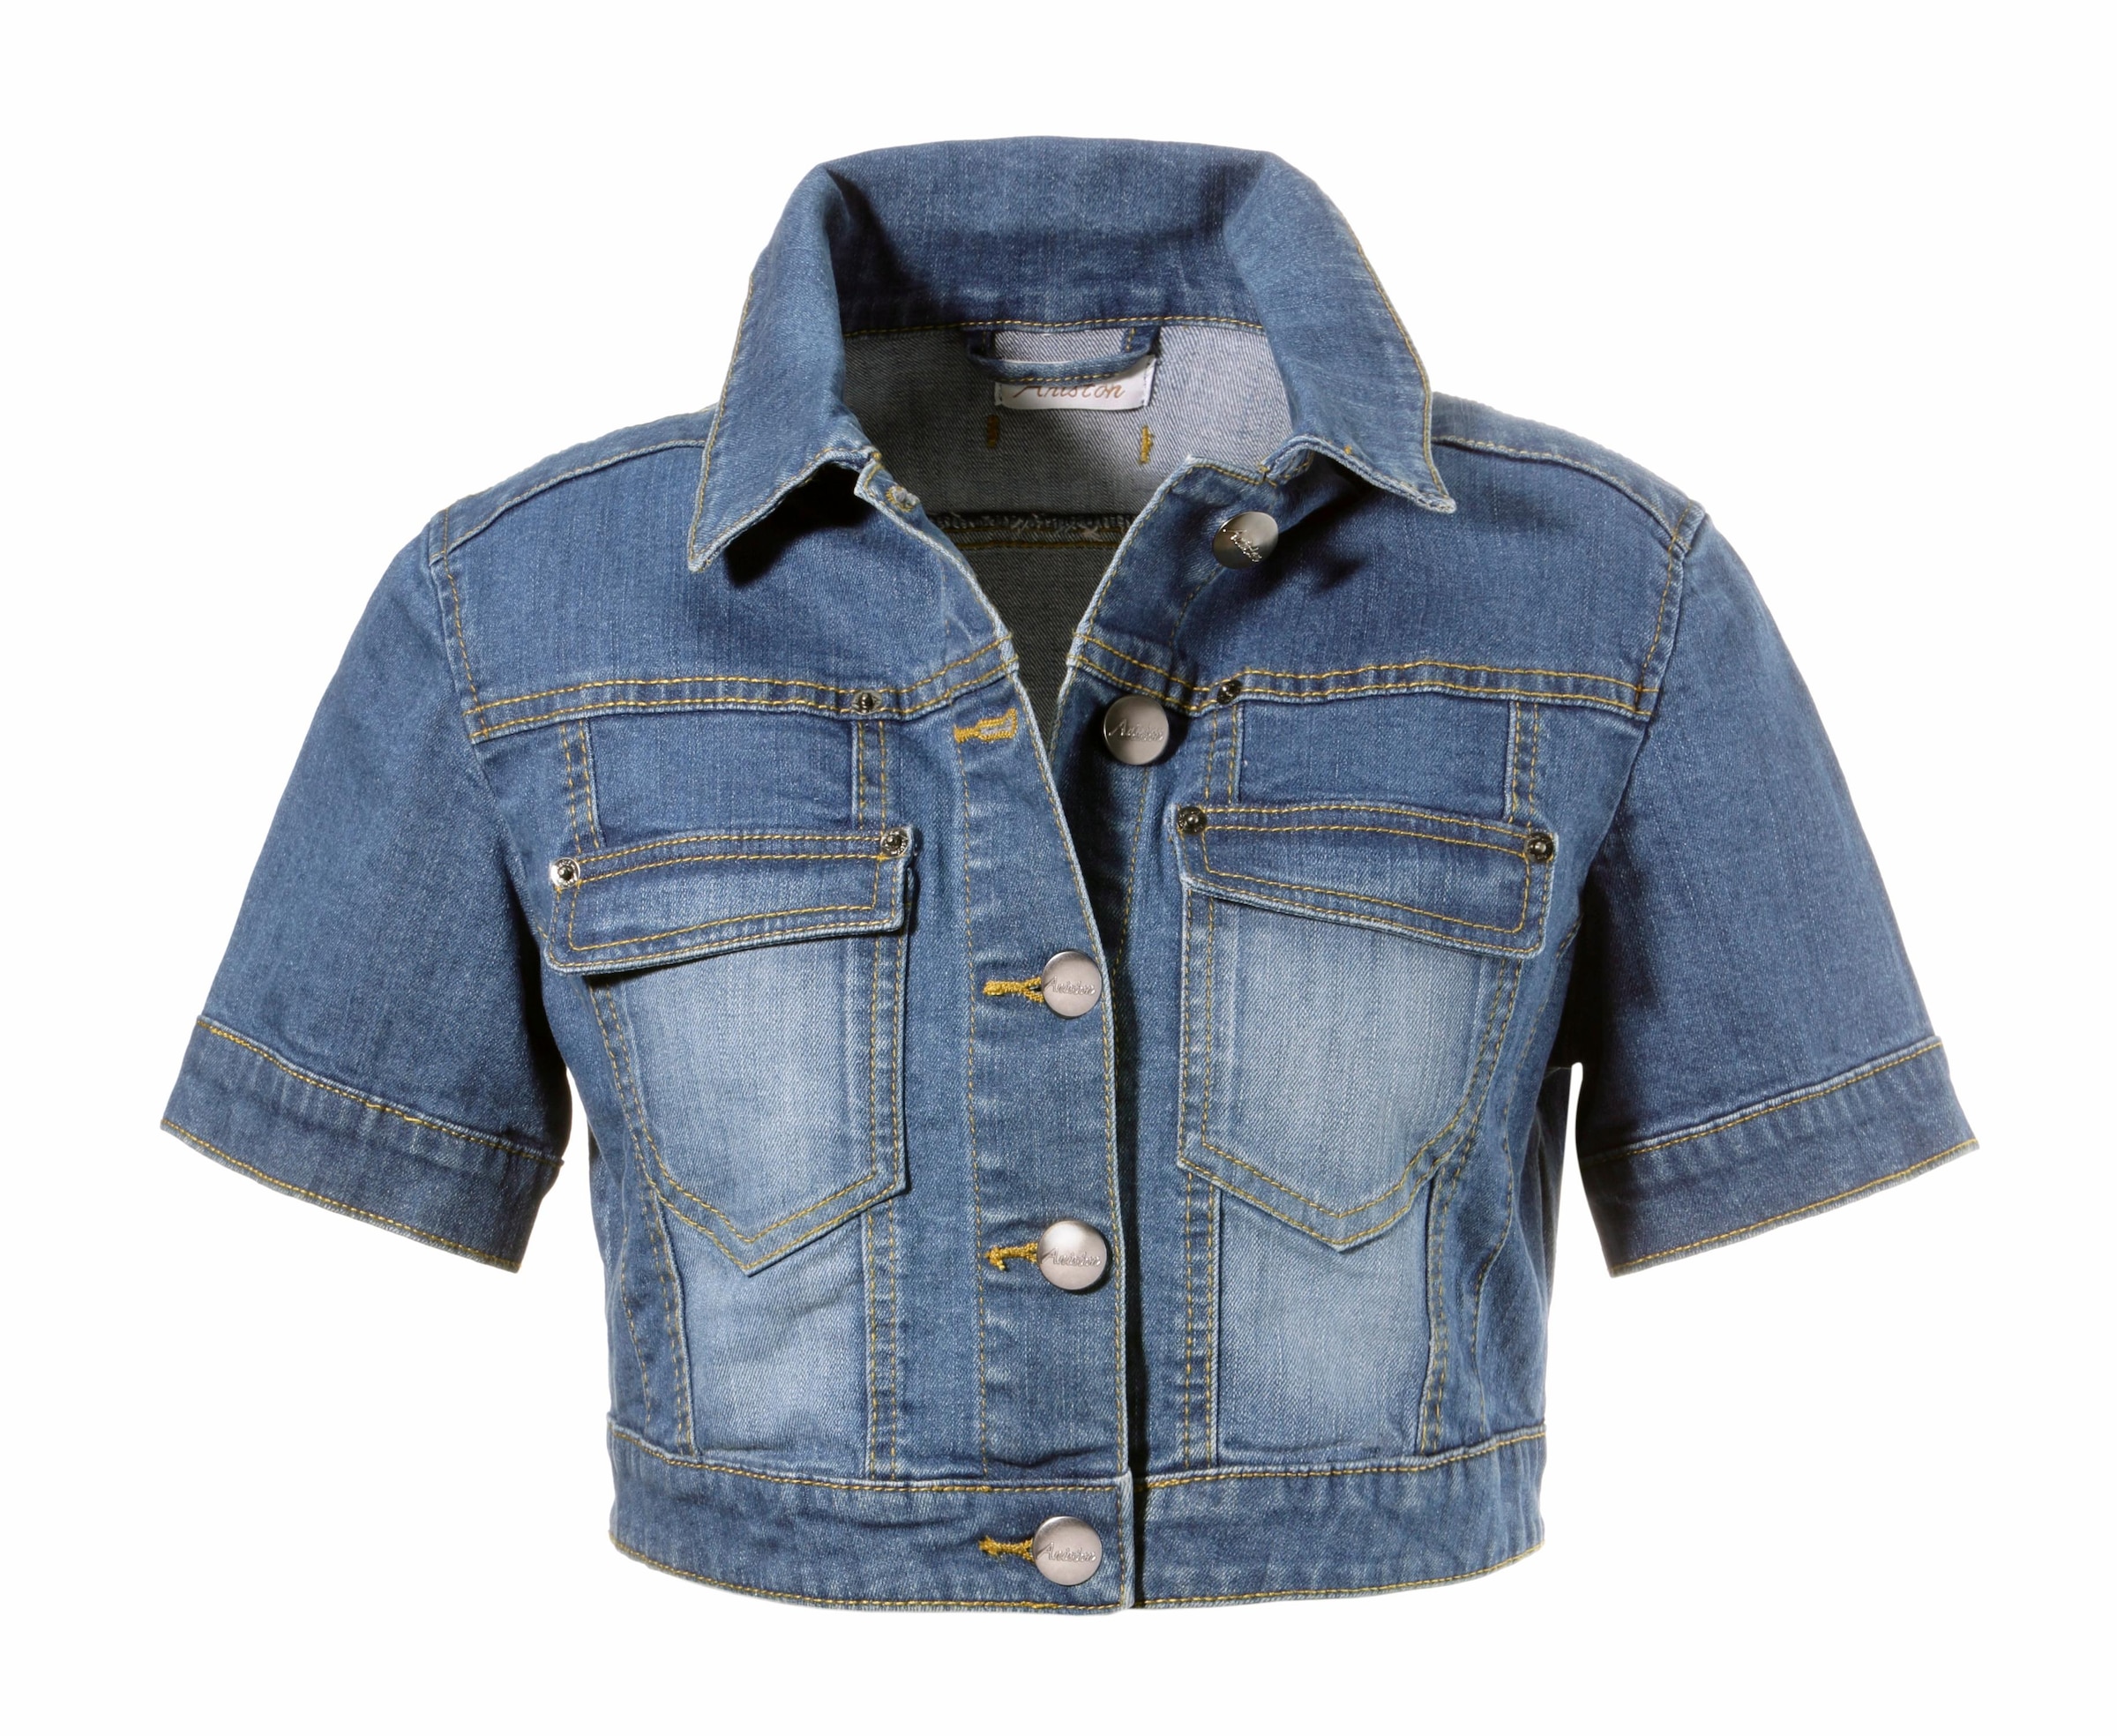 Aniston CASUAL Jeansjacke, Used-Washung kaufen in